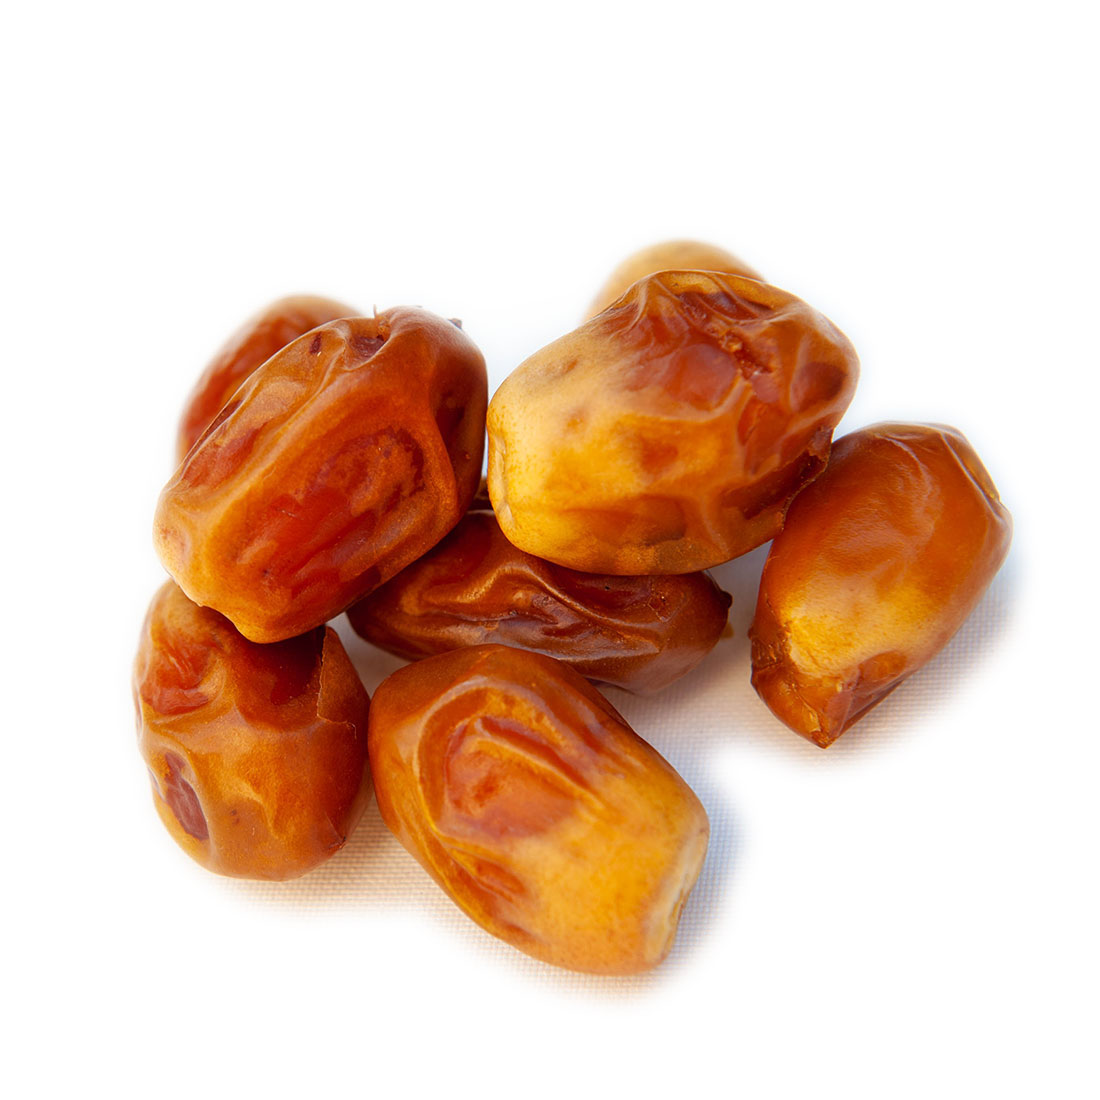 Where to Buy Dates in Iran? - Organic Zahedi Date| Nutex Date Products